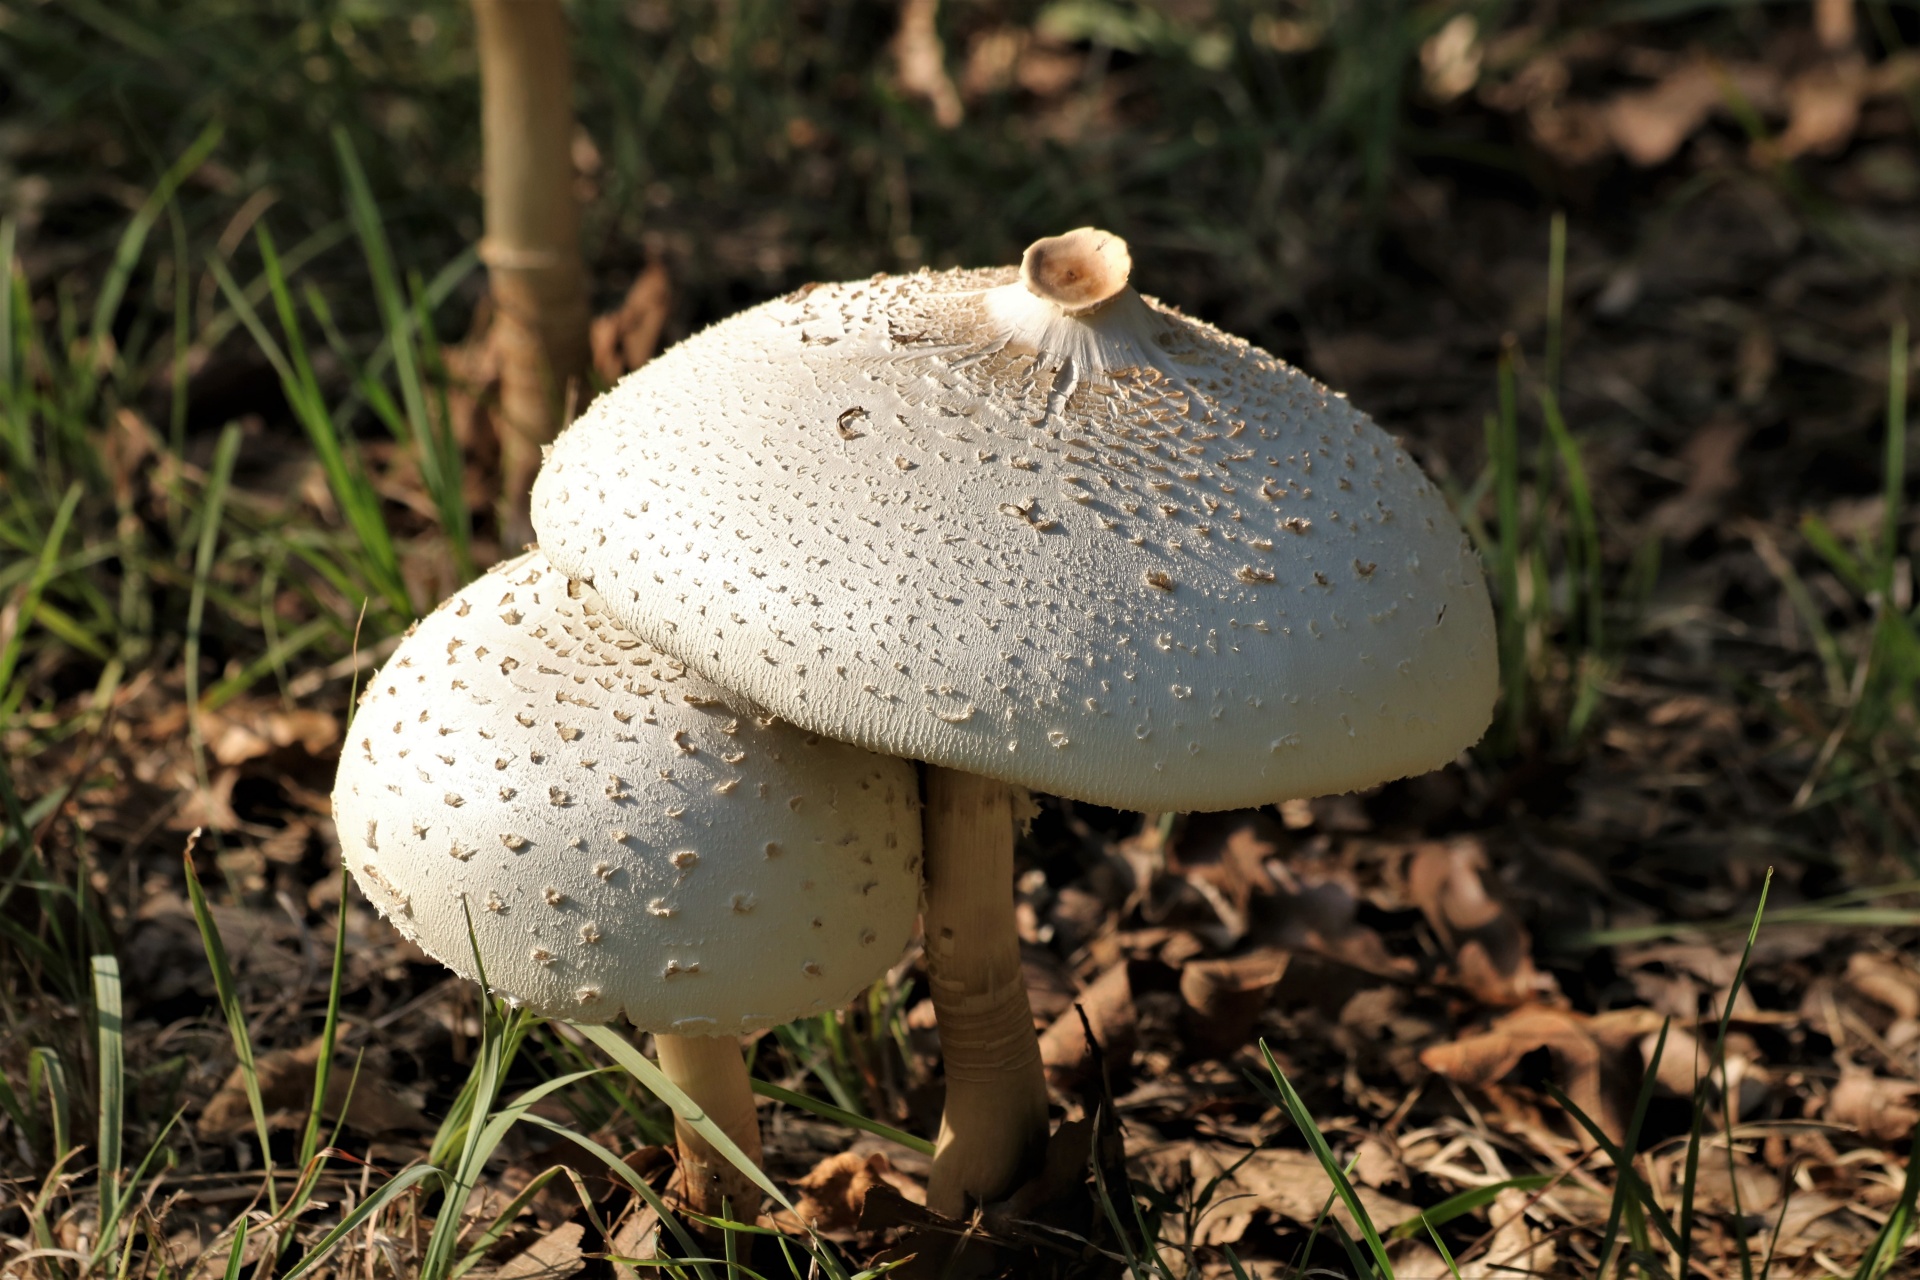 Close-up of two white Amanita mushrooms, one growing beneath the other, in brown leaves and green grass.